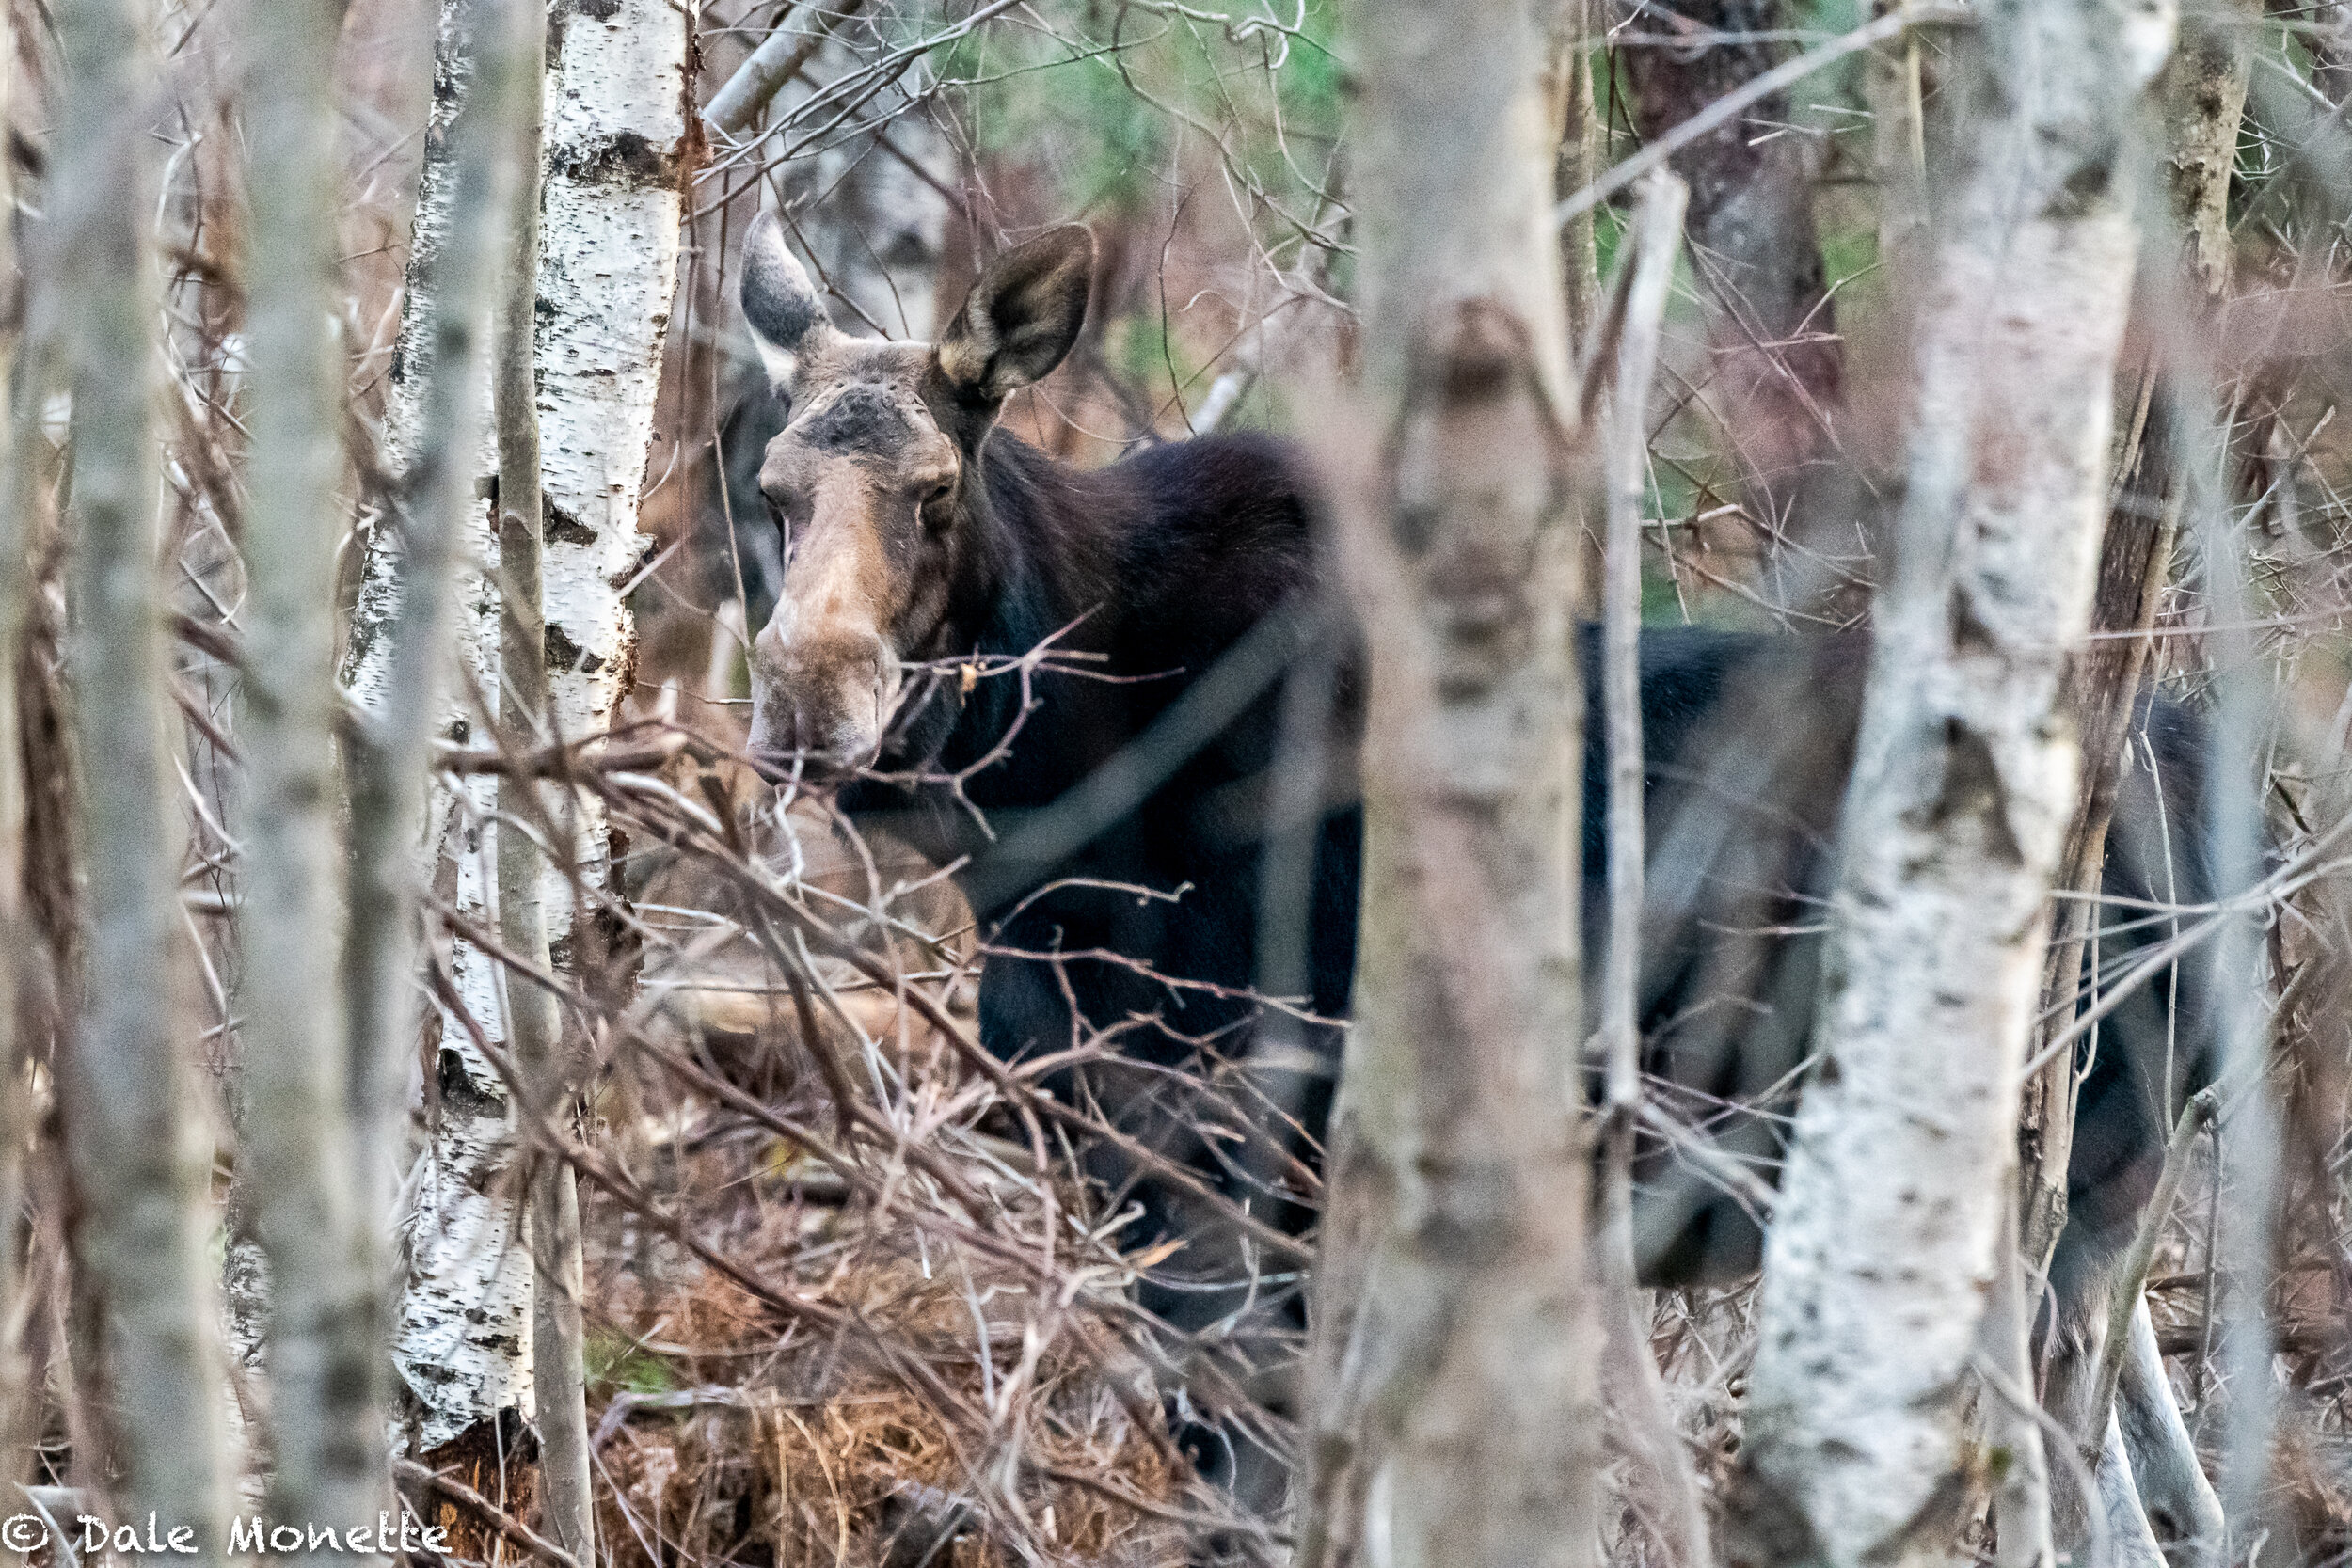   Peek-a-Boo…… these large animals can hide and be almost invisible …. Anytime I see a moose its a great day!  From this morning…  